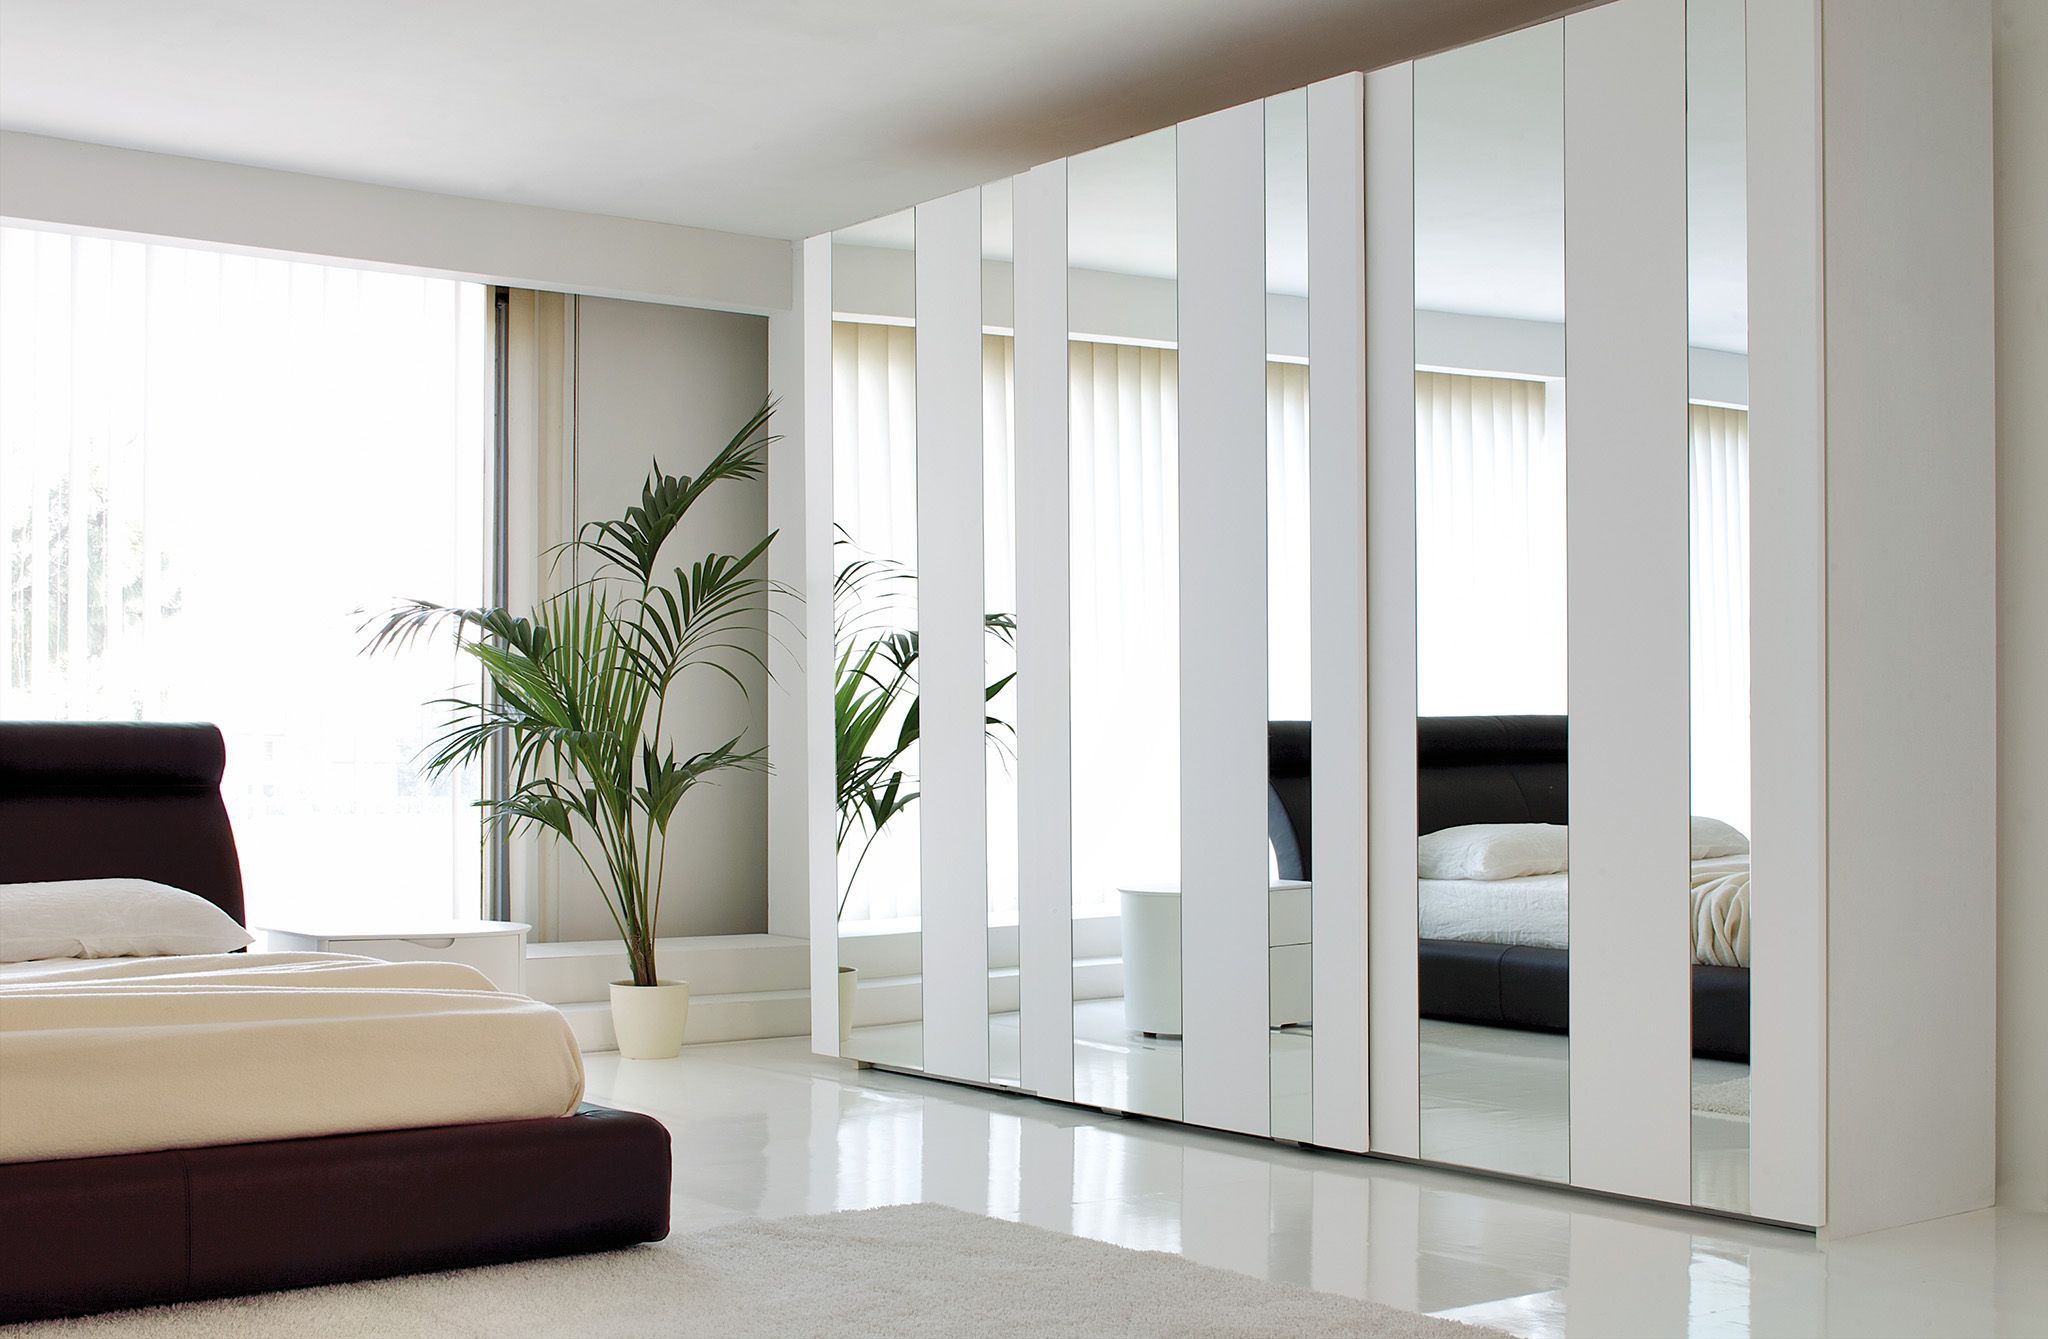 Fitted Wardrobes Ideas | Elegant Mirrored Wardrobe Designs With Regard To Full Mirrored Wardrobes (View 18 of 20)